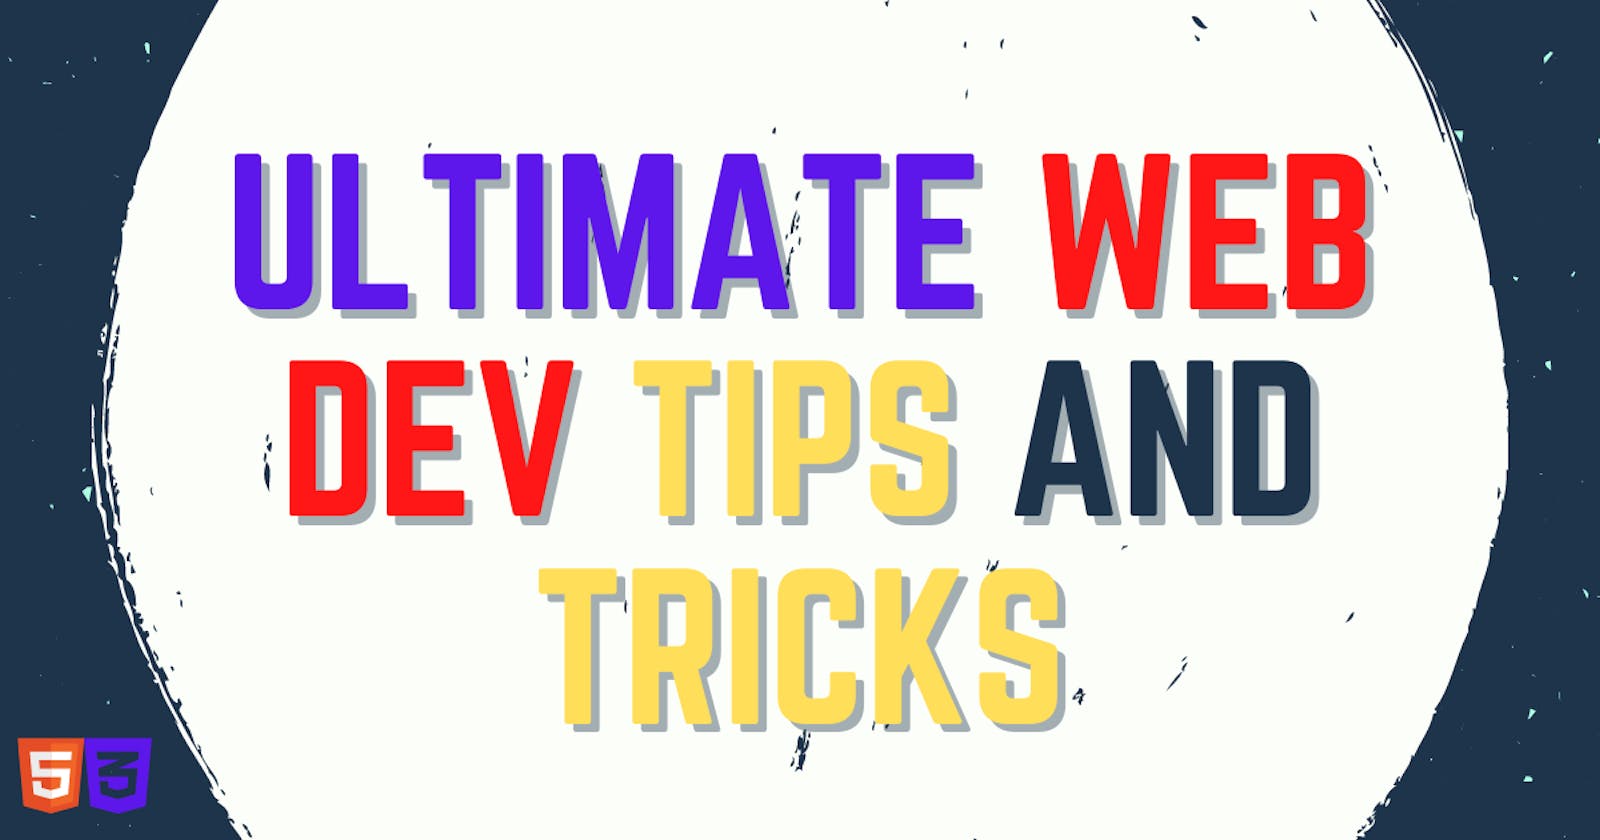 No one will give these Web Dev tips and tricks